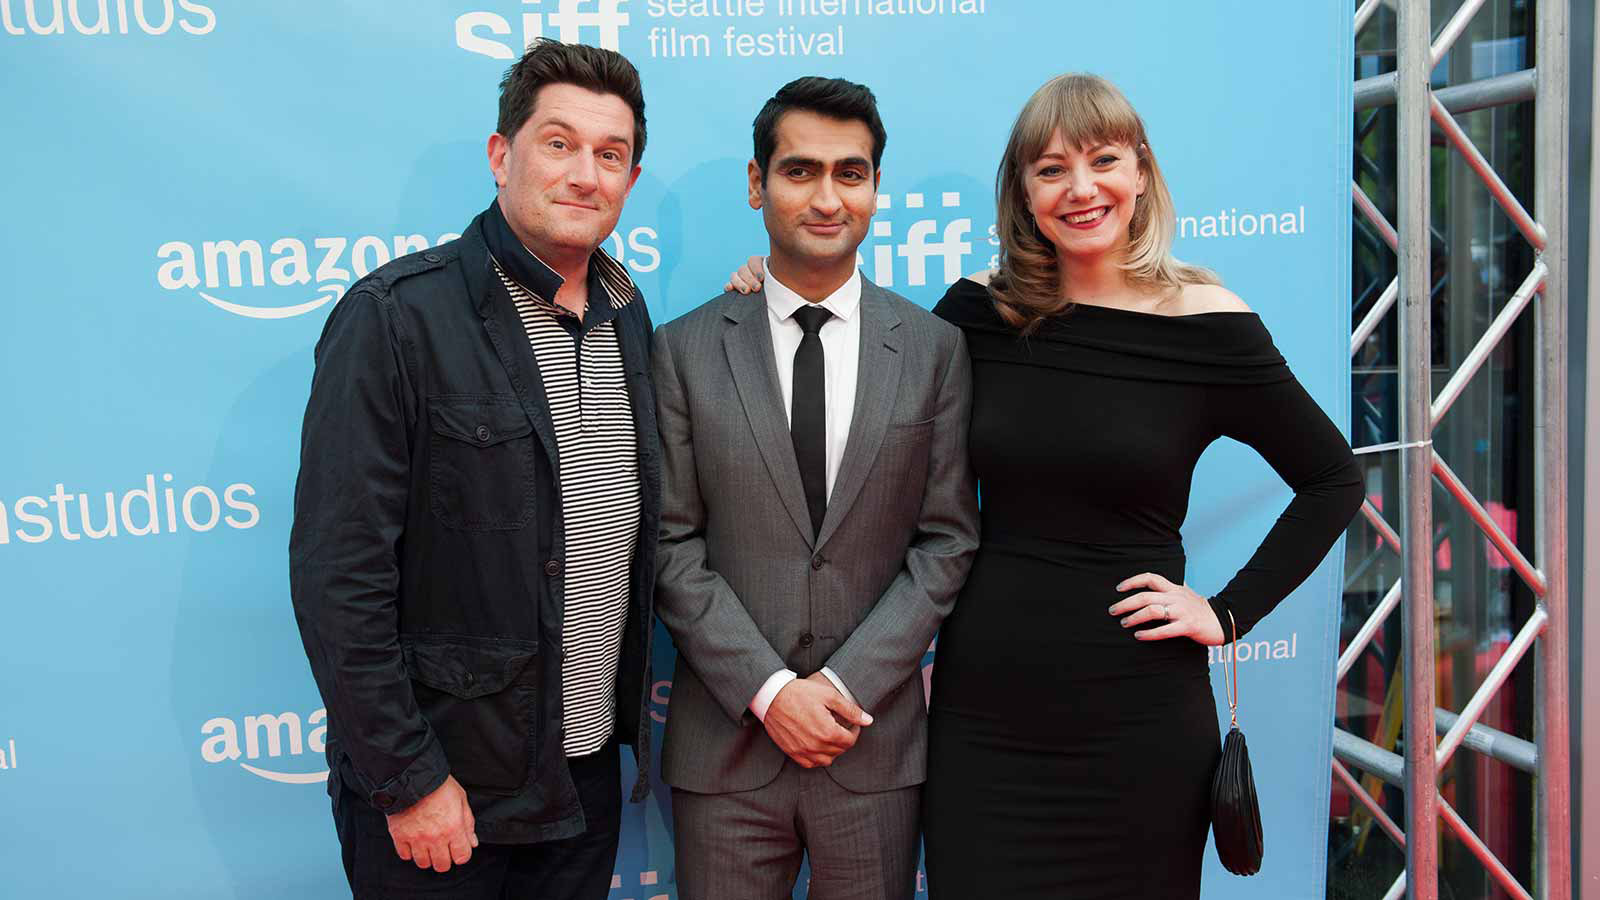 Director, Michael Showalter, actor and writer, Kumail Nanjiani, and actor and writer, Emily V. Gordon, pose on the red carpet on Opening Night, which featured their film, The Big Sick